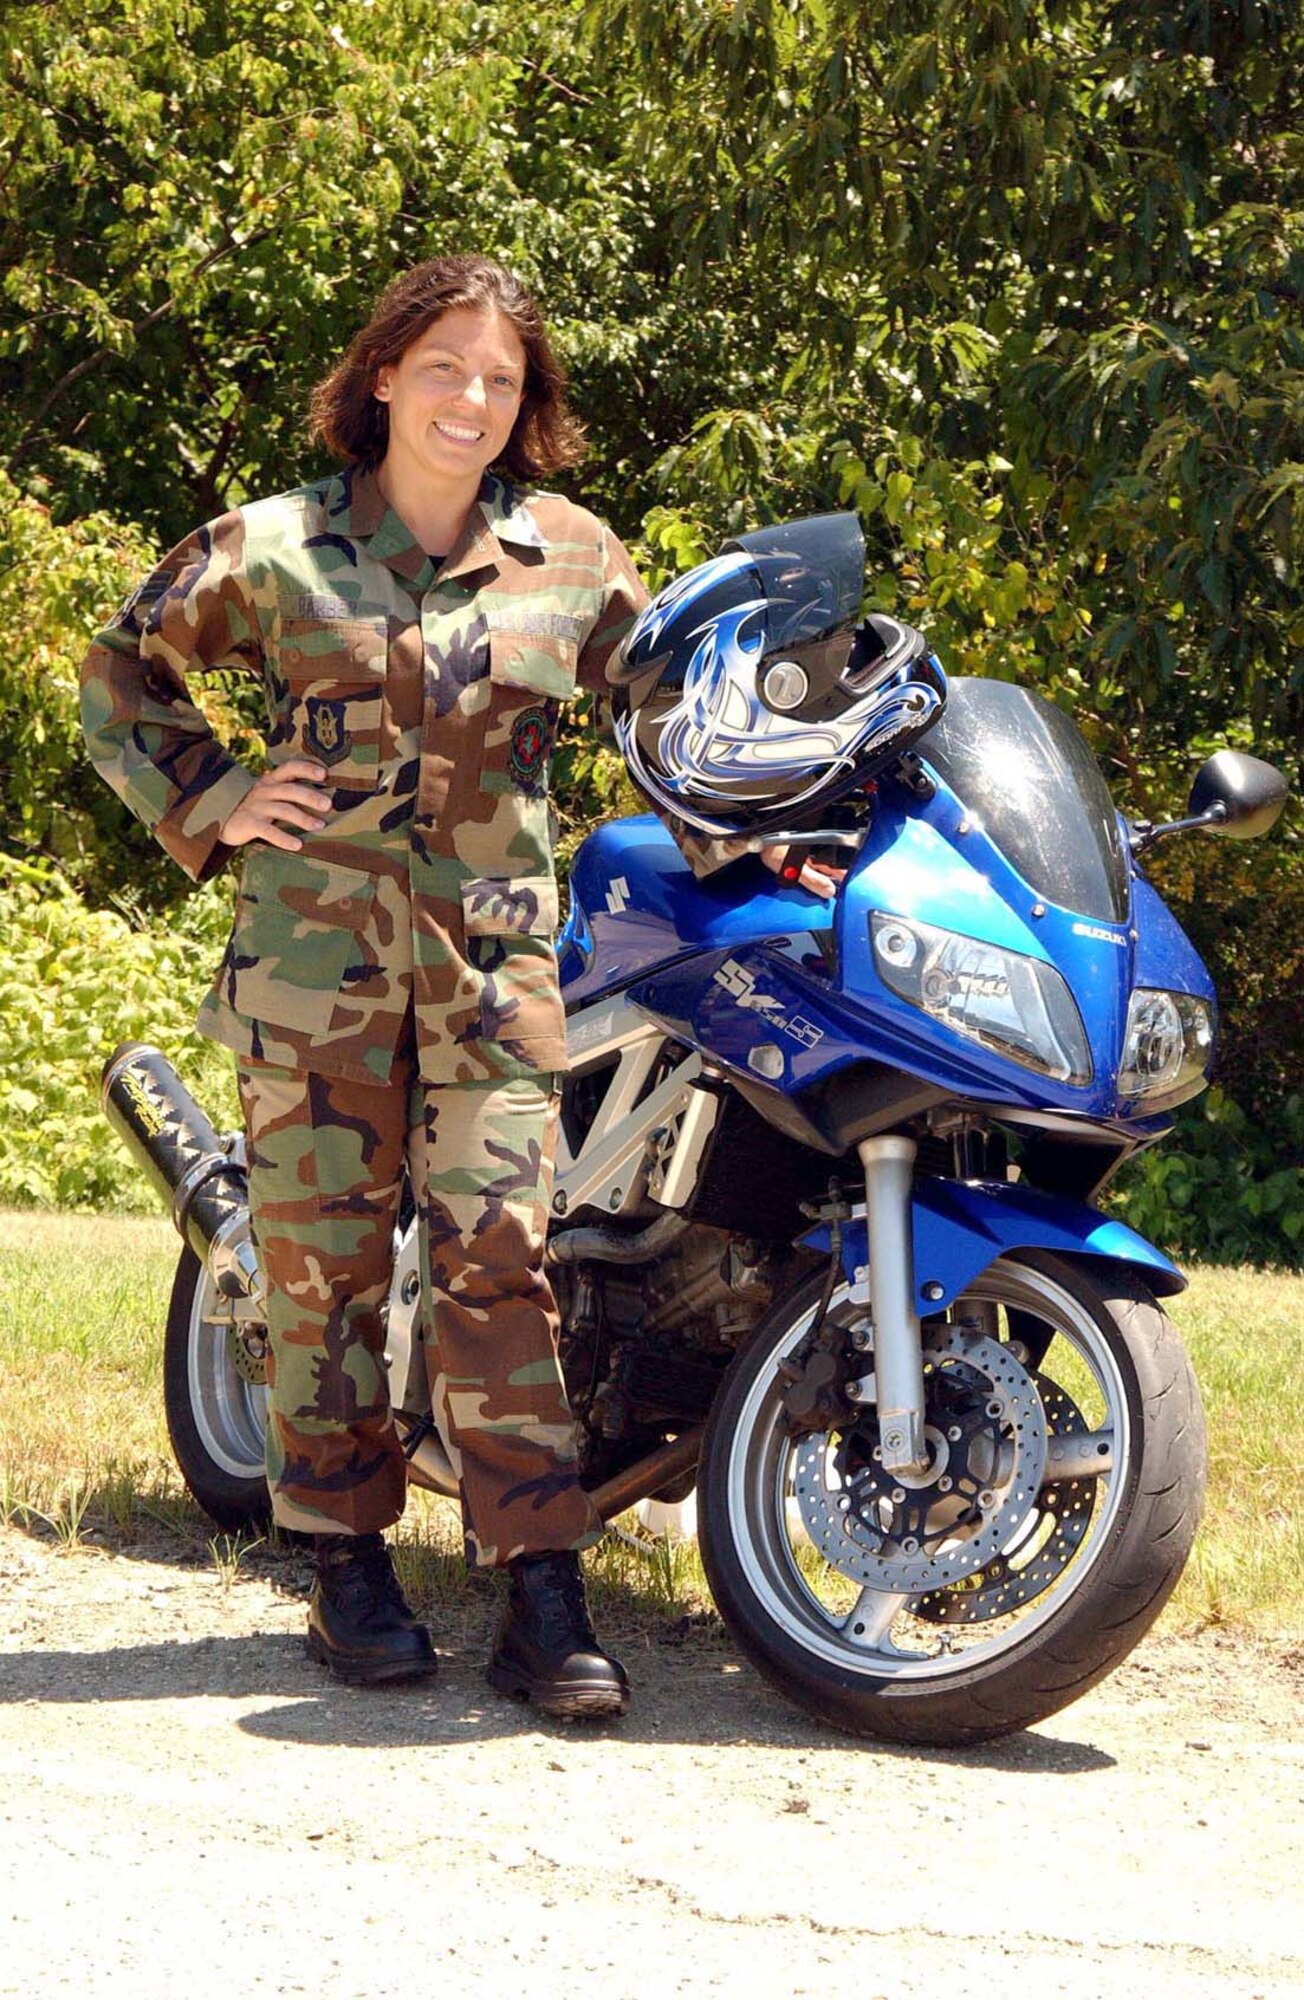 ANDREWS AIR FORCE BASE, Md. - Senior Airman Melissa Barber, 459th Aeromedical Evacuation Squadron technician, poses for a photo with her Suzuki SV 650-S. (U.S. Air Force photo/Airman Ashley Crawford)